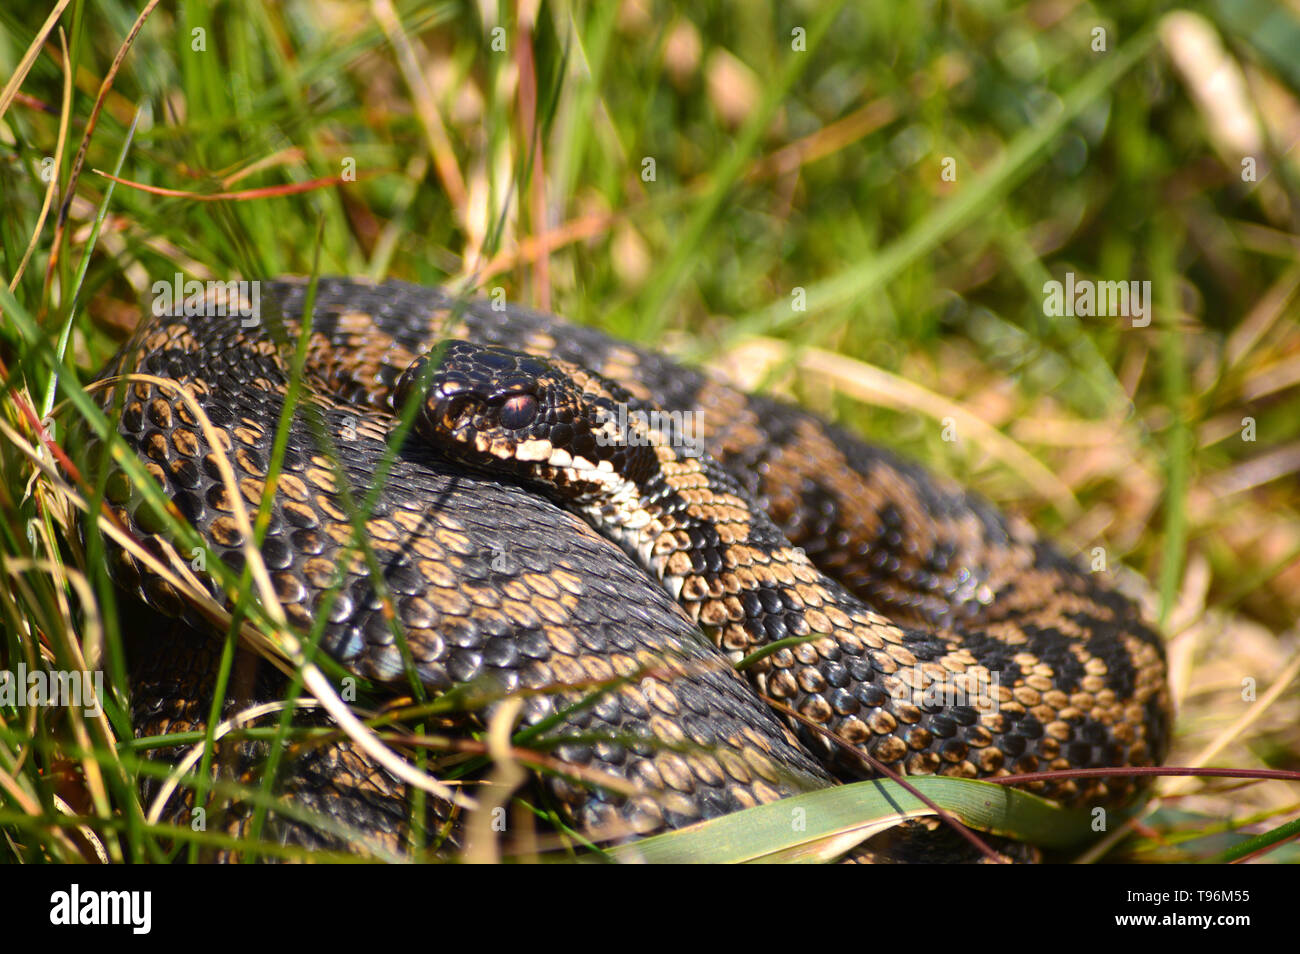 Adder or Viper in Devon, (Vipera berus) coiled in the grass on top of a Devon dry stone wall - the only poisonous British snake Stock Photo